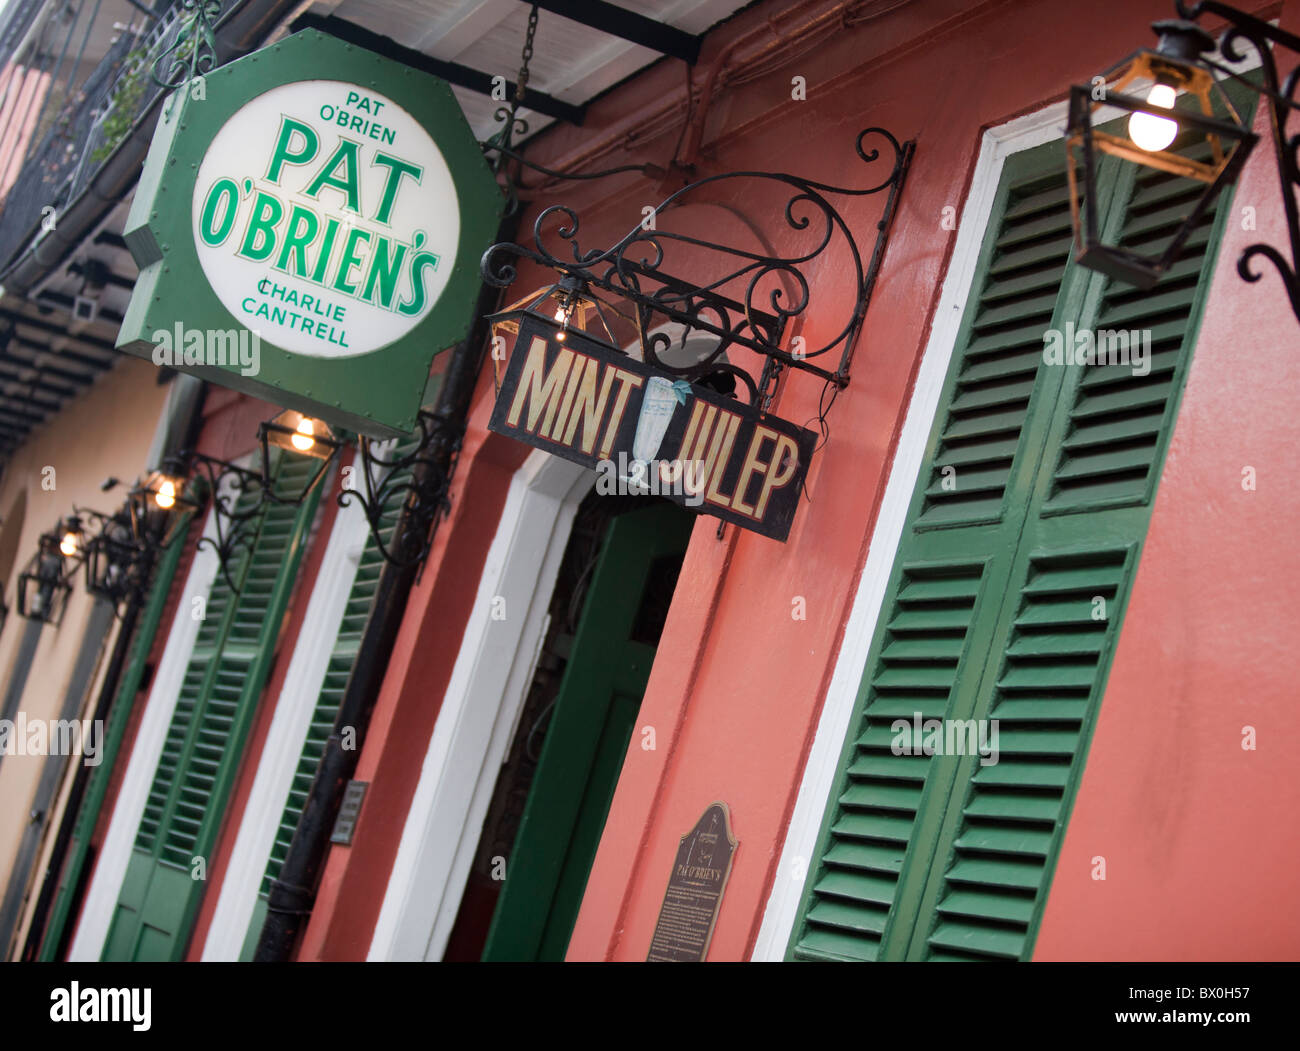 Pat O'Brien's bar and nightclub in New Orleans, Louisiana's French Quarter is home of the famed mint julep drink. Stock Photo